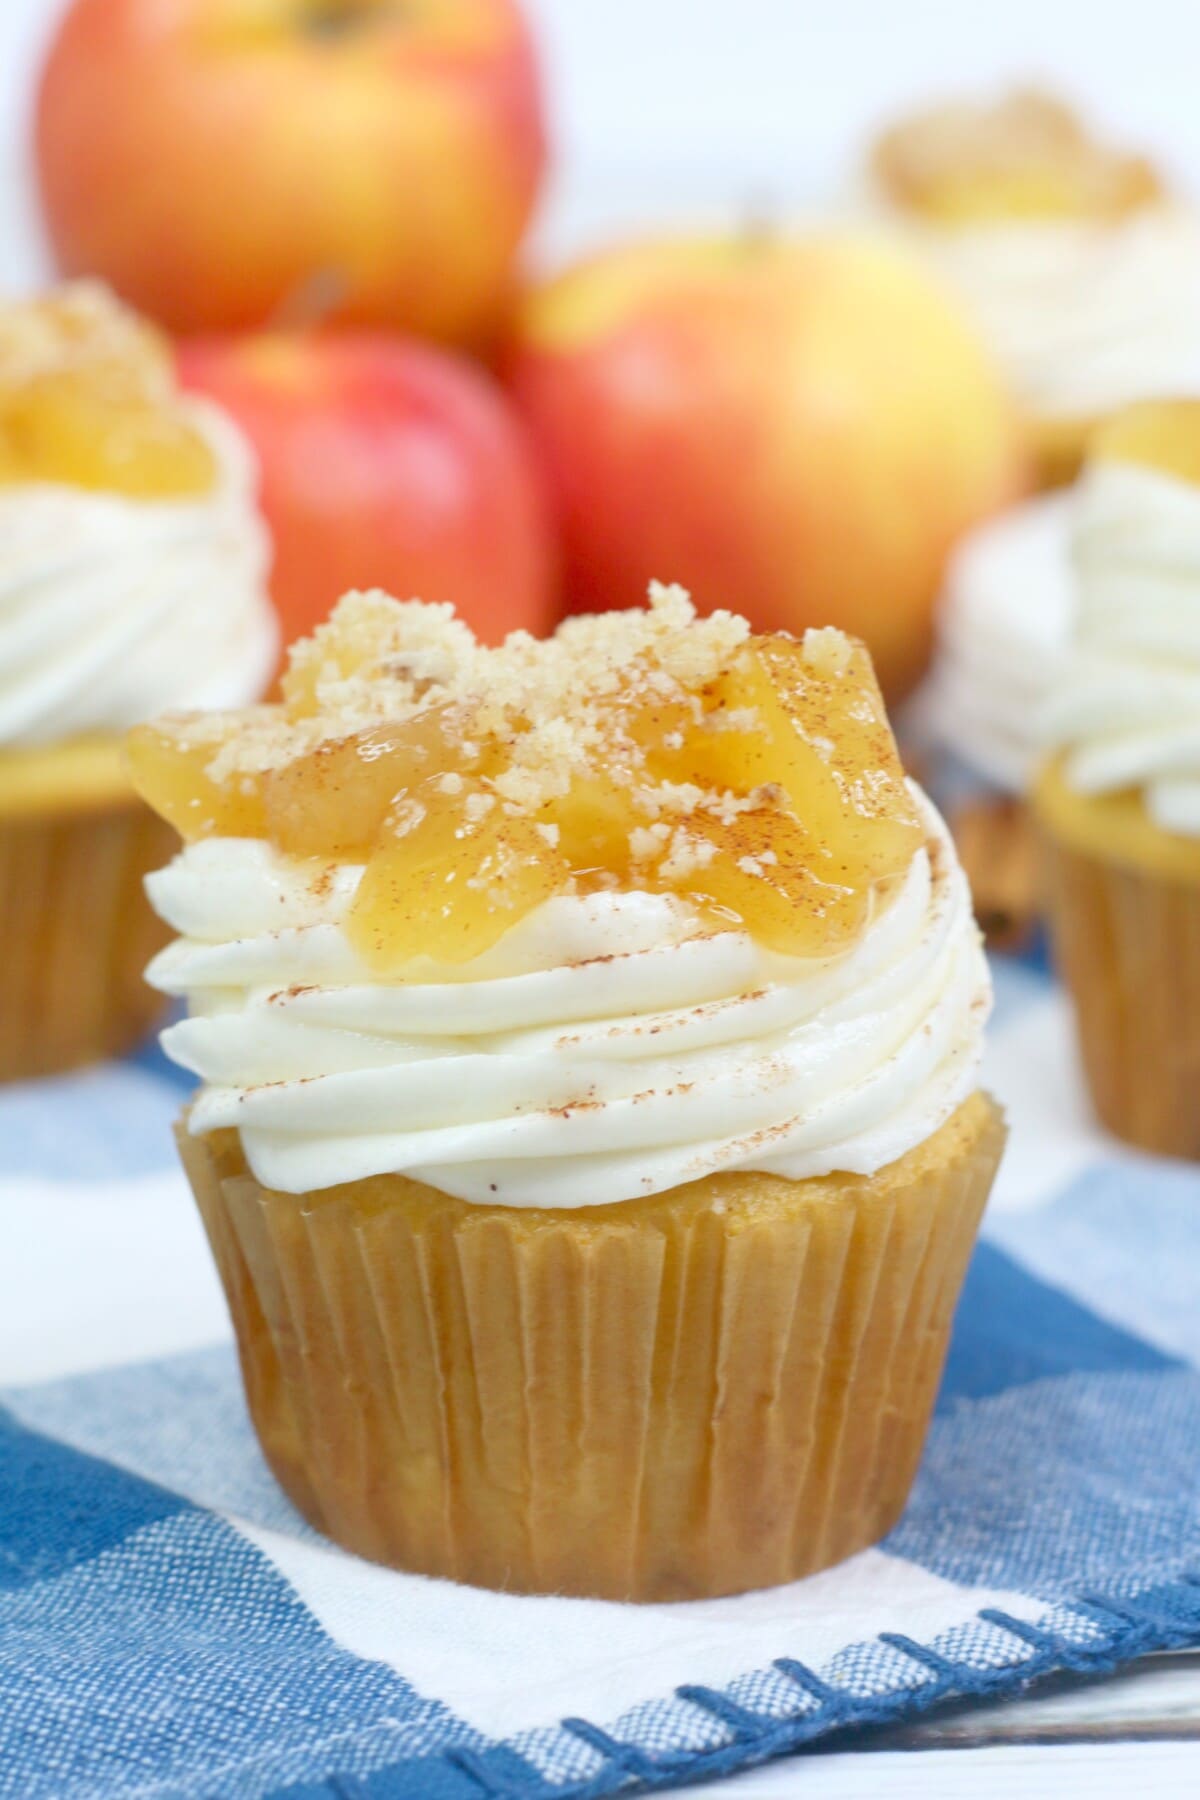 apple pie cupcakes sitting on a blue and white checked napkin